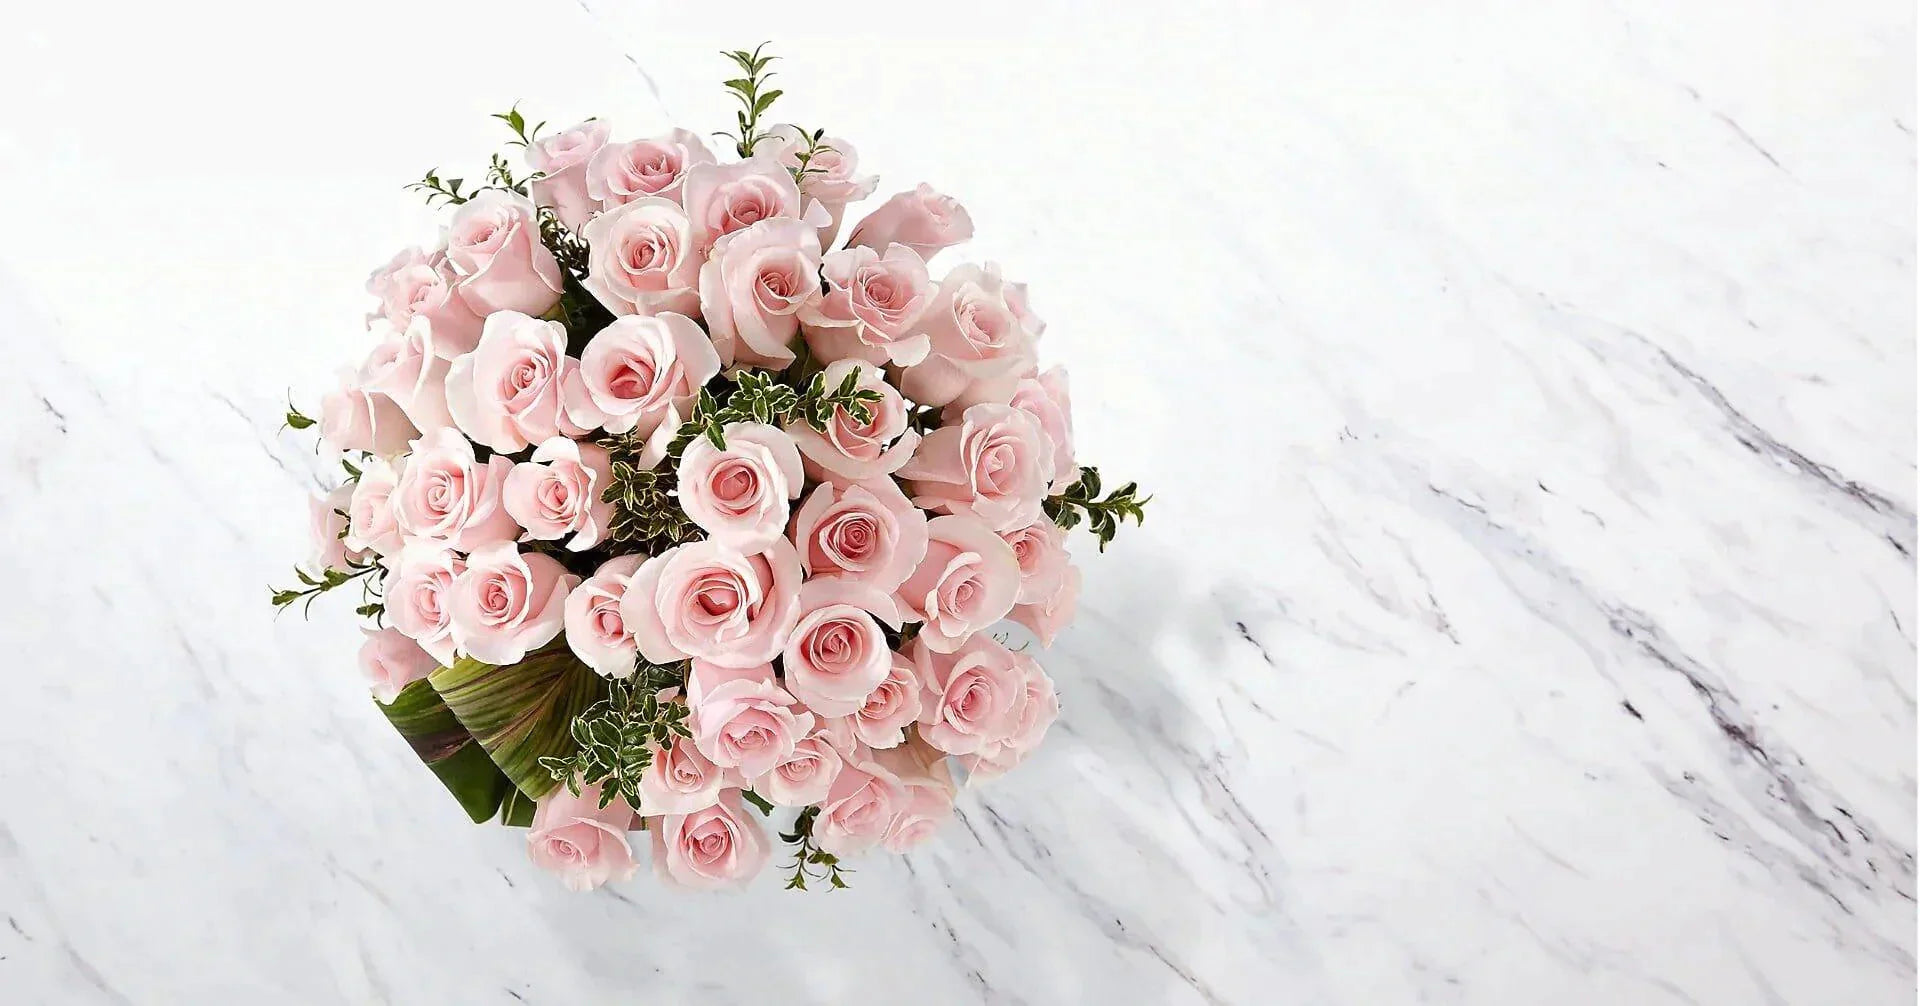 Delighted Luxury™ Rose Bouquet